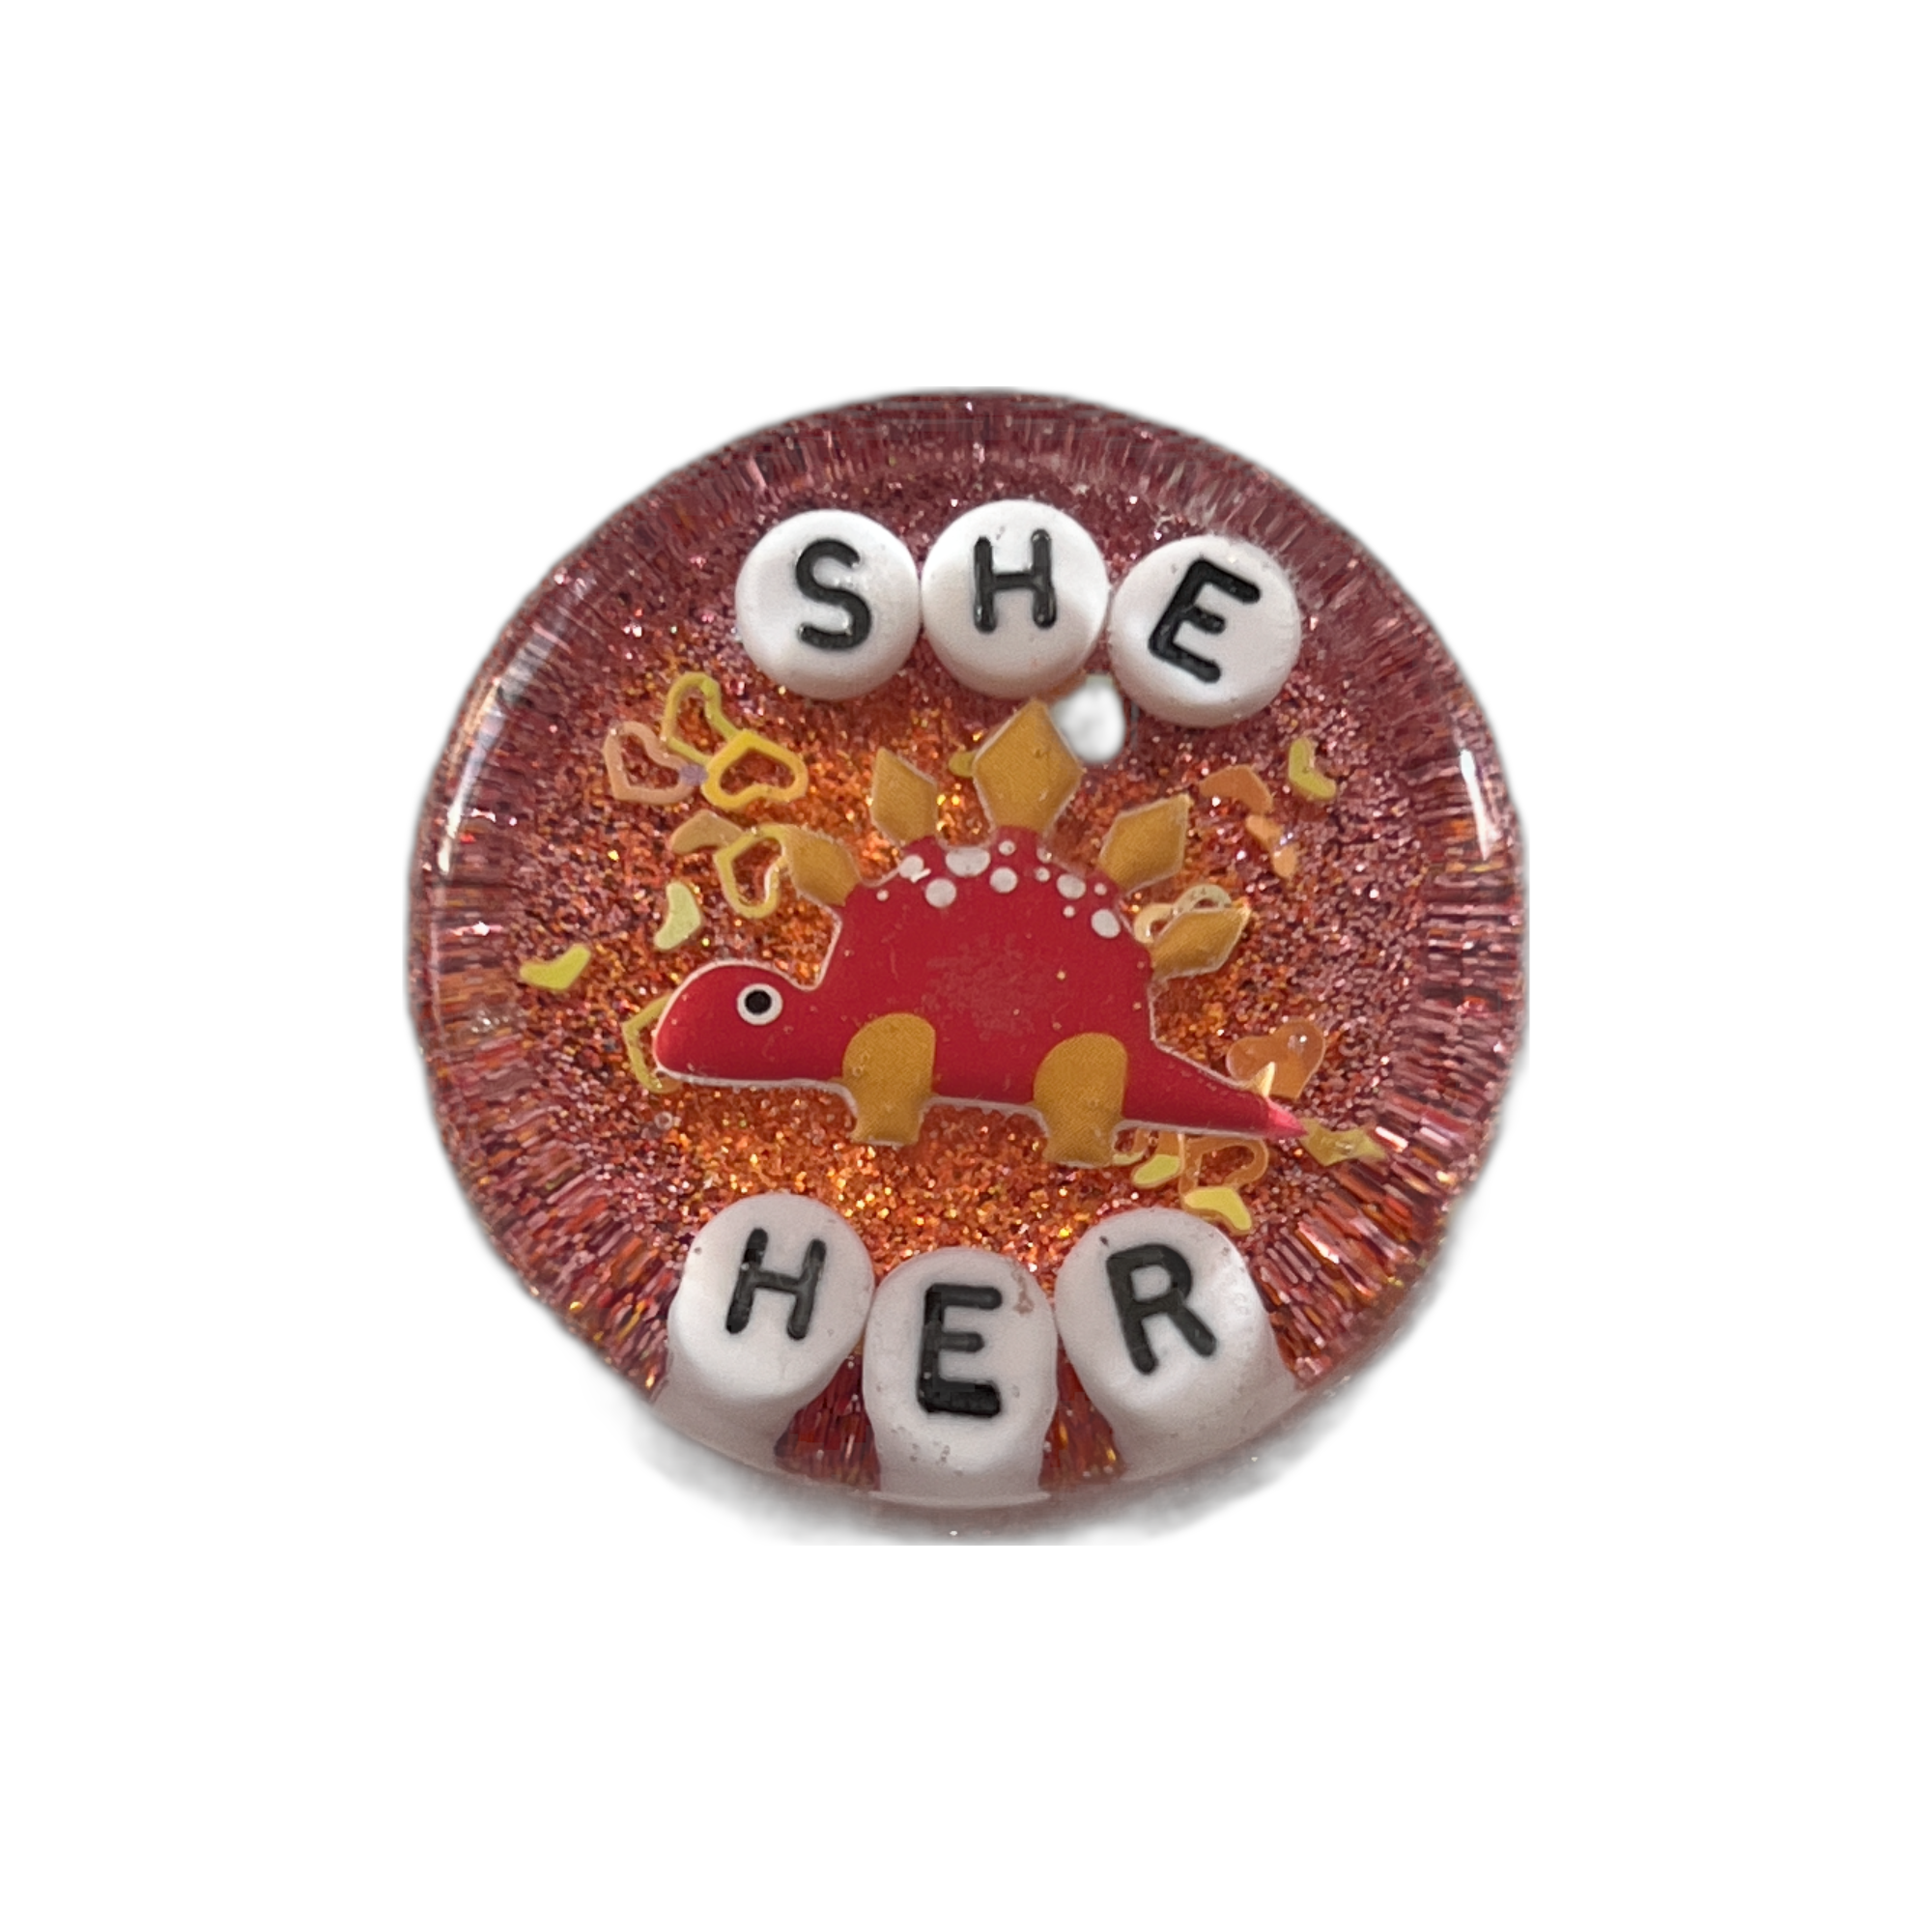 She/Her - Shower Art - READY TO SHIP